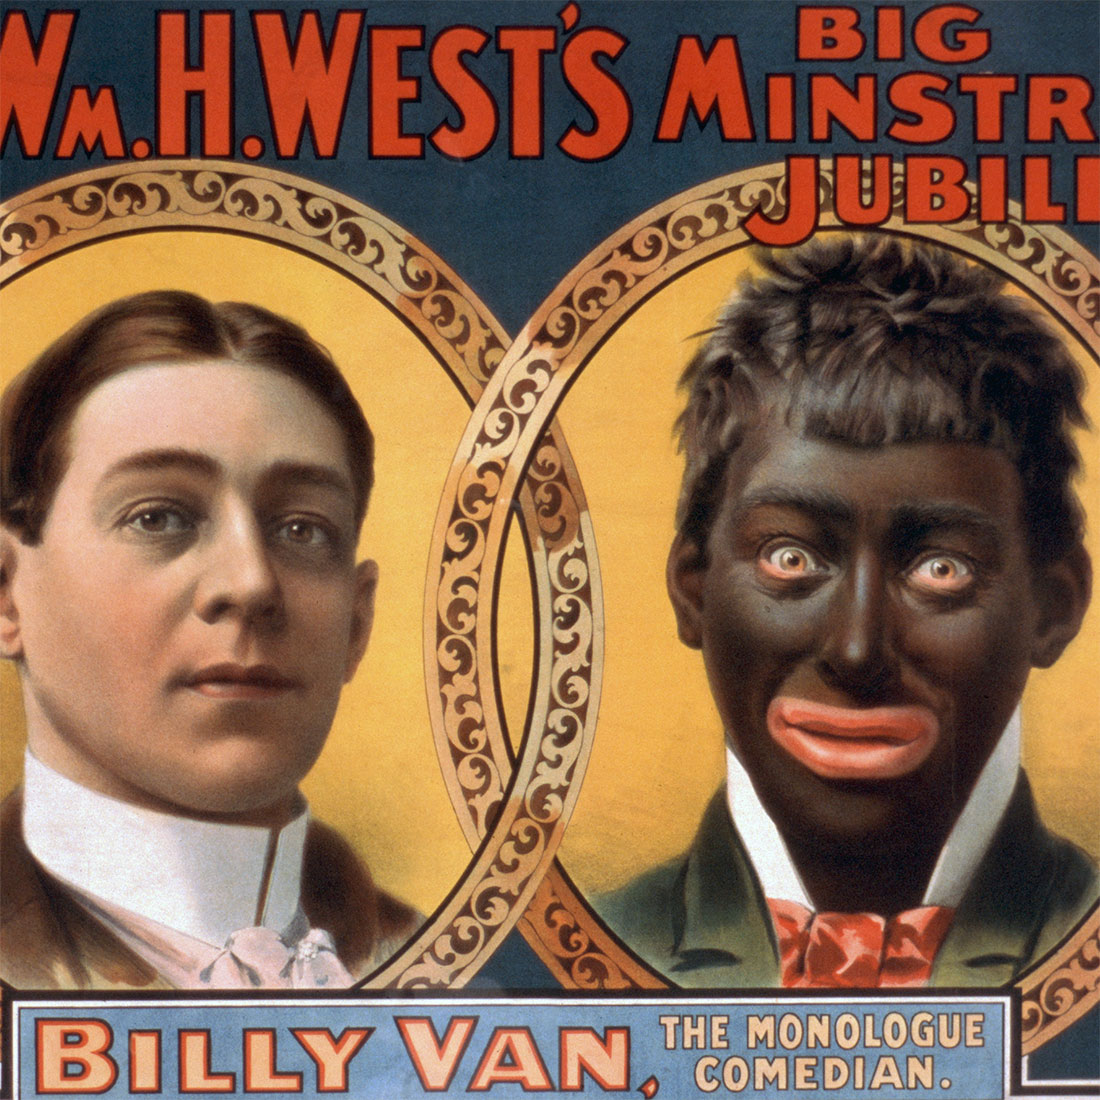 Poster with heading Wm. H. West's Big Minstrel Jubilee with 2 drawings of an actor one without makeup, and one in Blackface. The caption reads Billy Van. The Monologue Comedian.